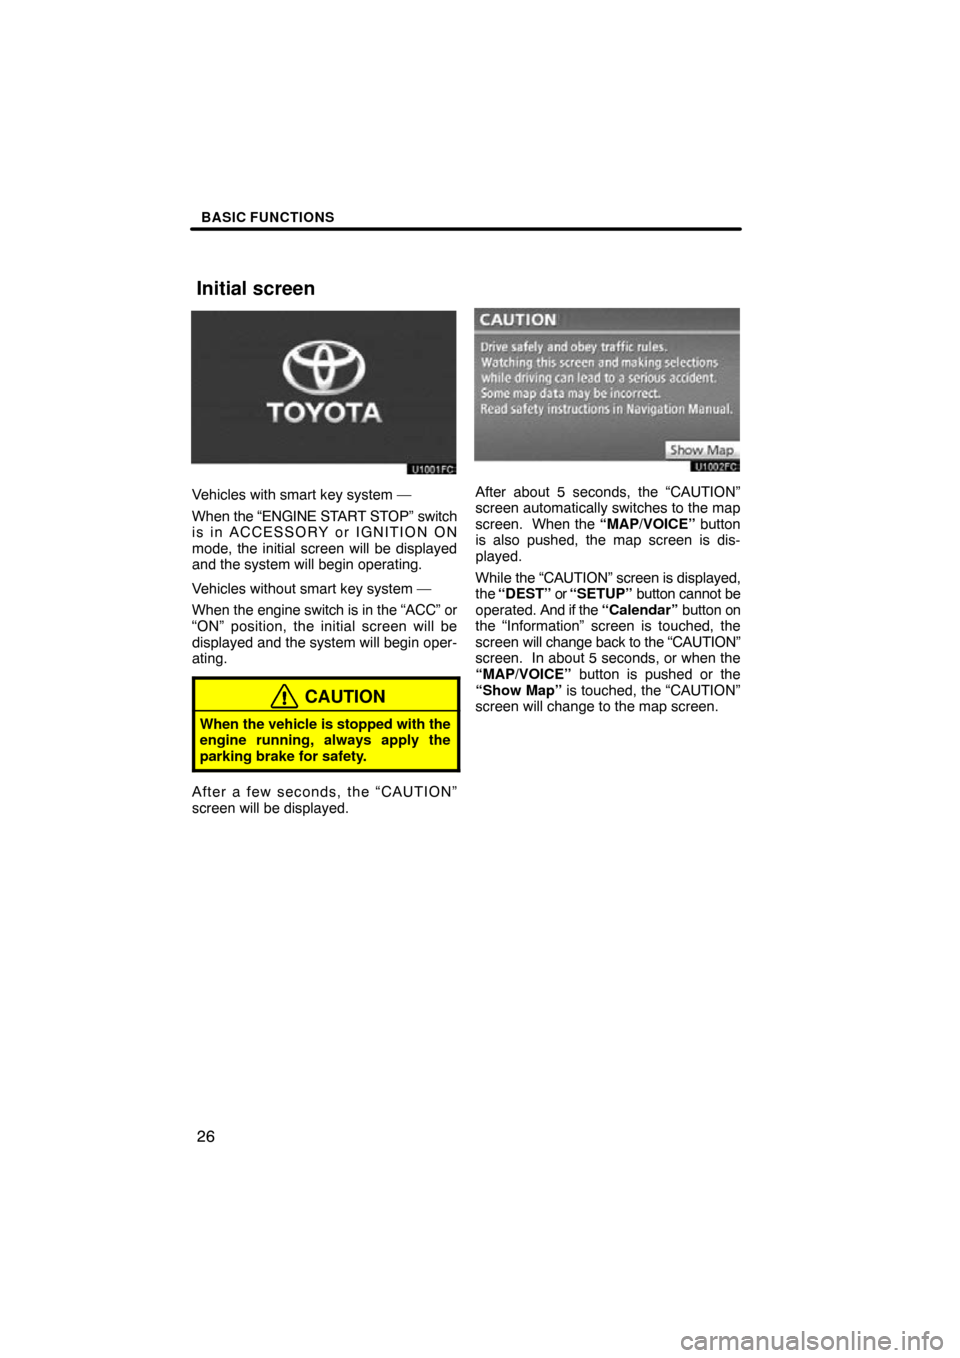 TOYOTA CAMRY 2011 XV50 / 9.G Navigation Manual BASIC FUNCTIONS
26
Vehicles with smart key system —
When the “ENGINE START STOP” switch
is in ACCESSORY or IGNITION ON
mode, the initial screen will be displayed
and the system will begin operat